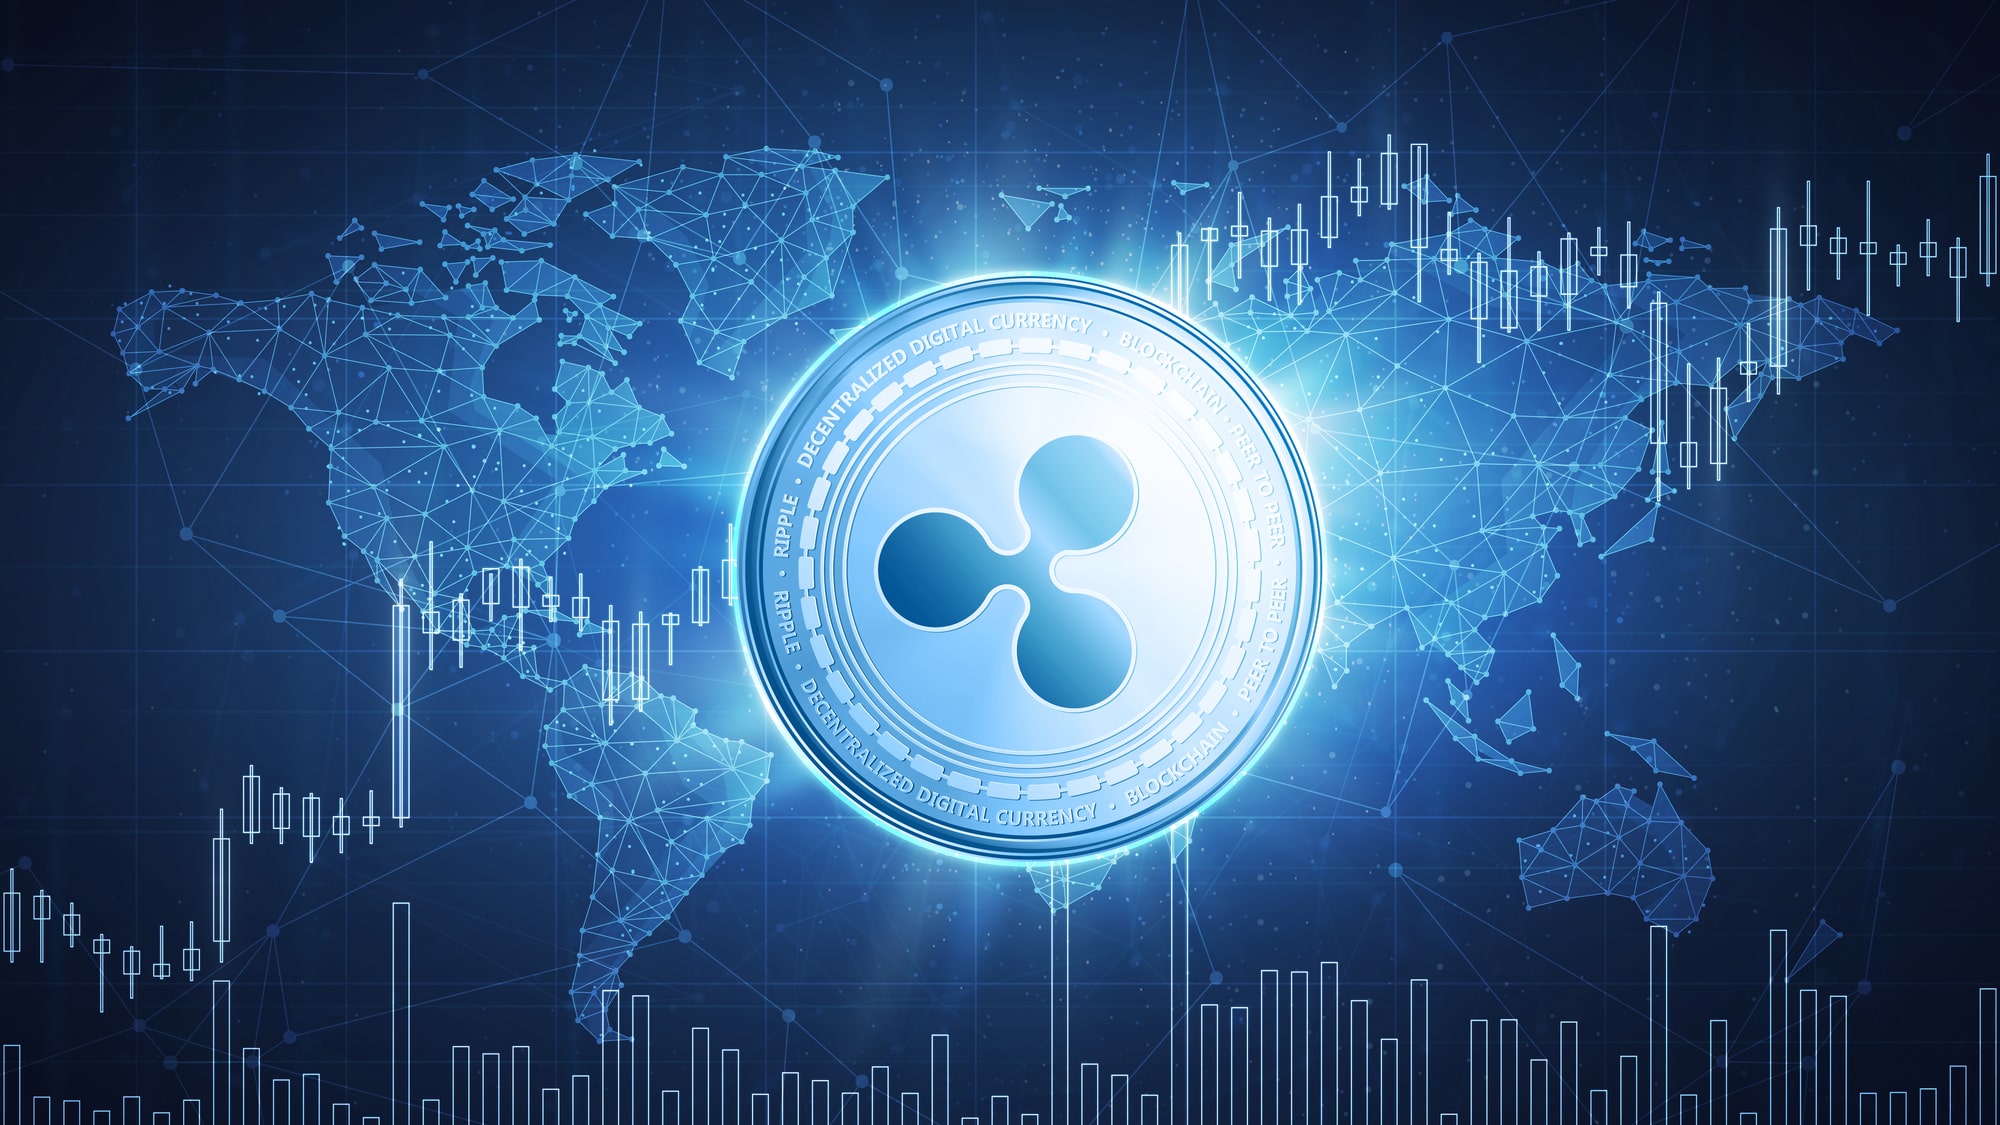 Ripple partners with Pyypl to deploy cross-border payment services in the Middle East